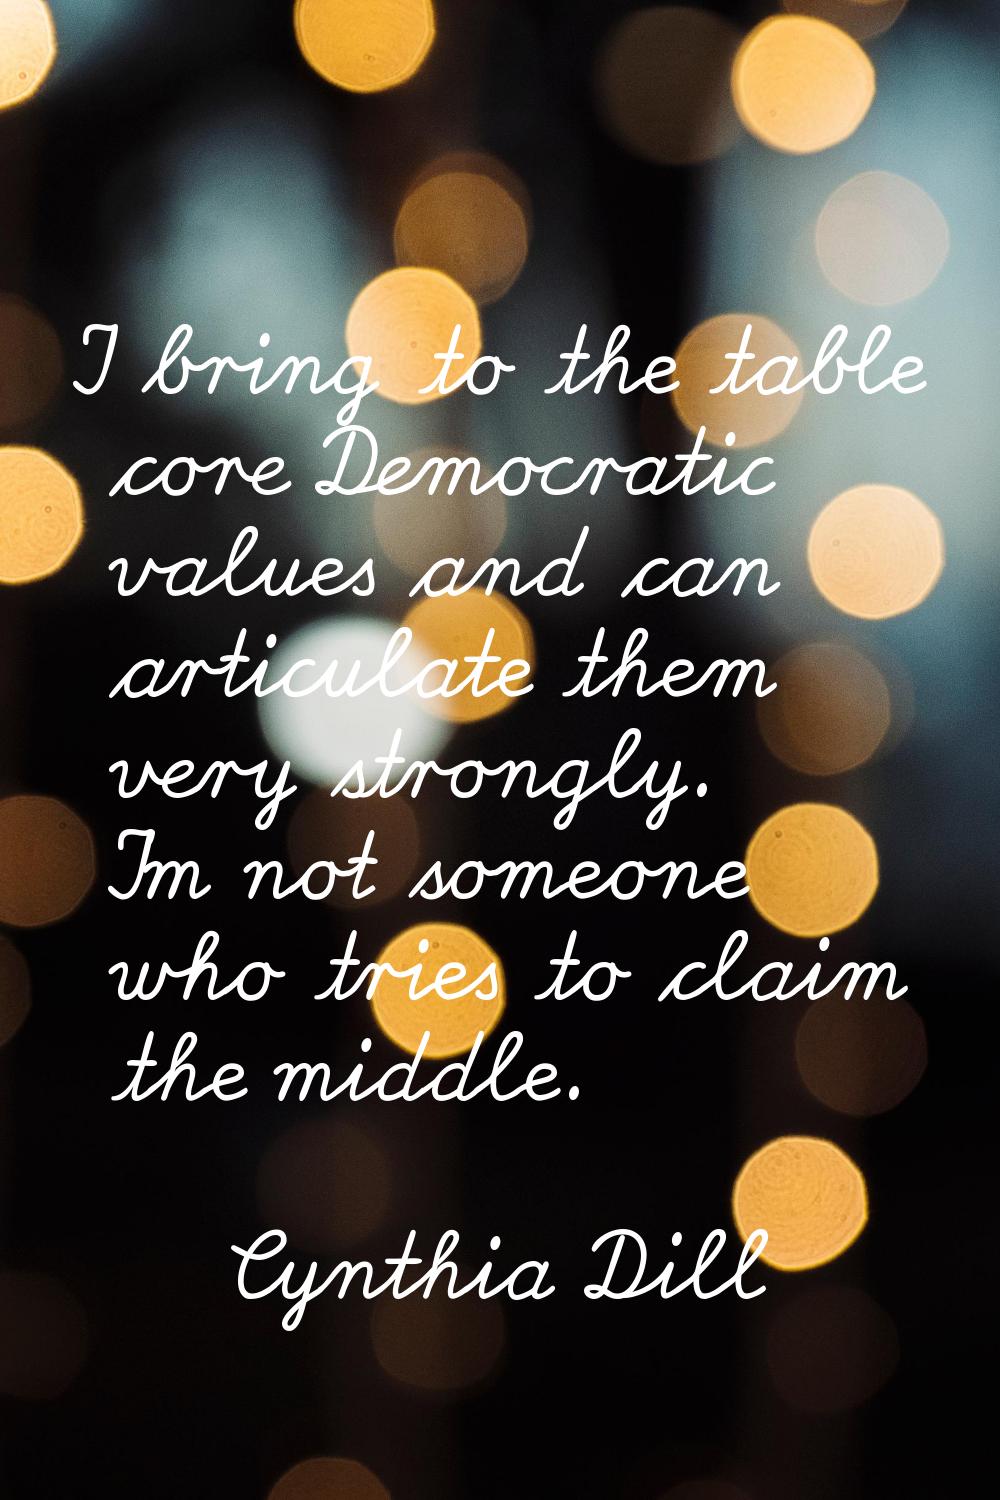 I bring to the table core Democratic values and can articulate them very strongly. I'm not someone 